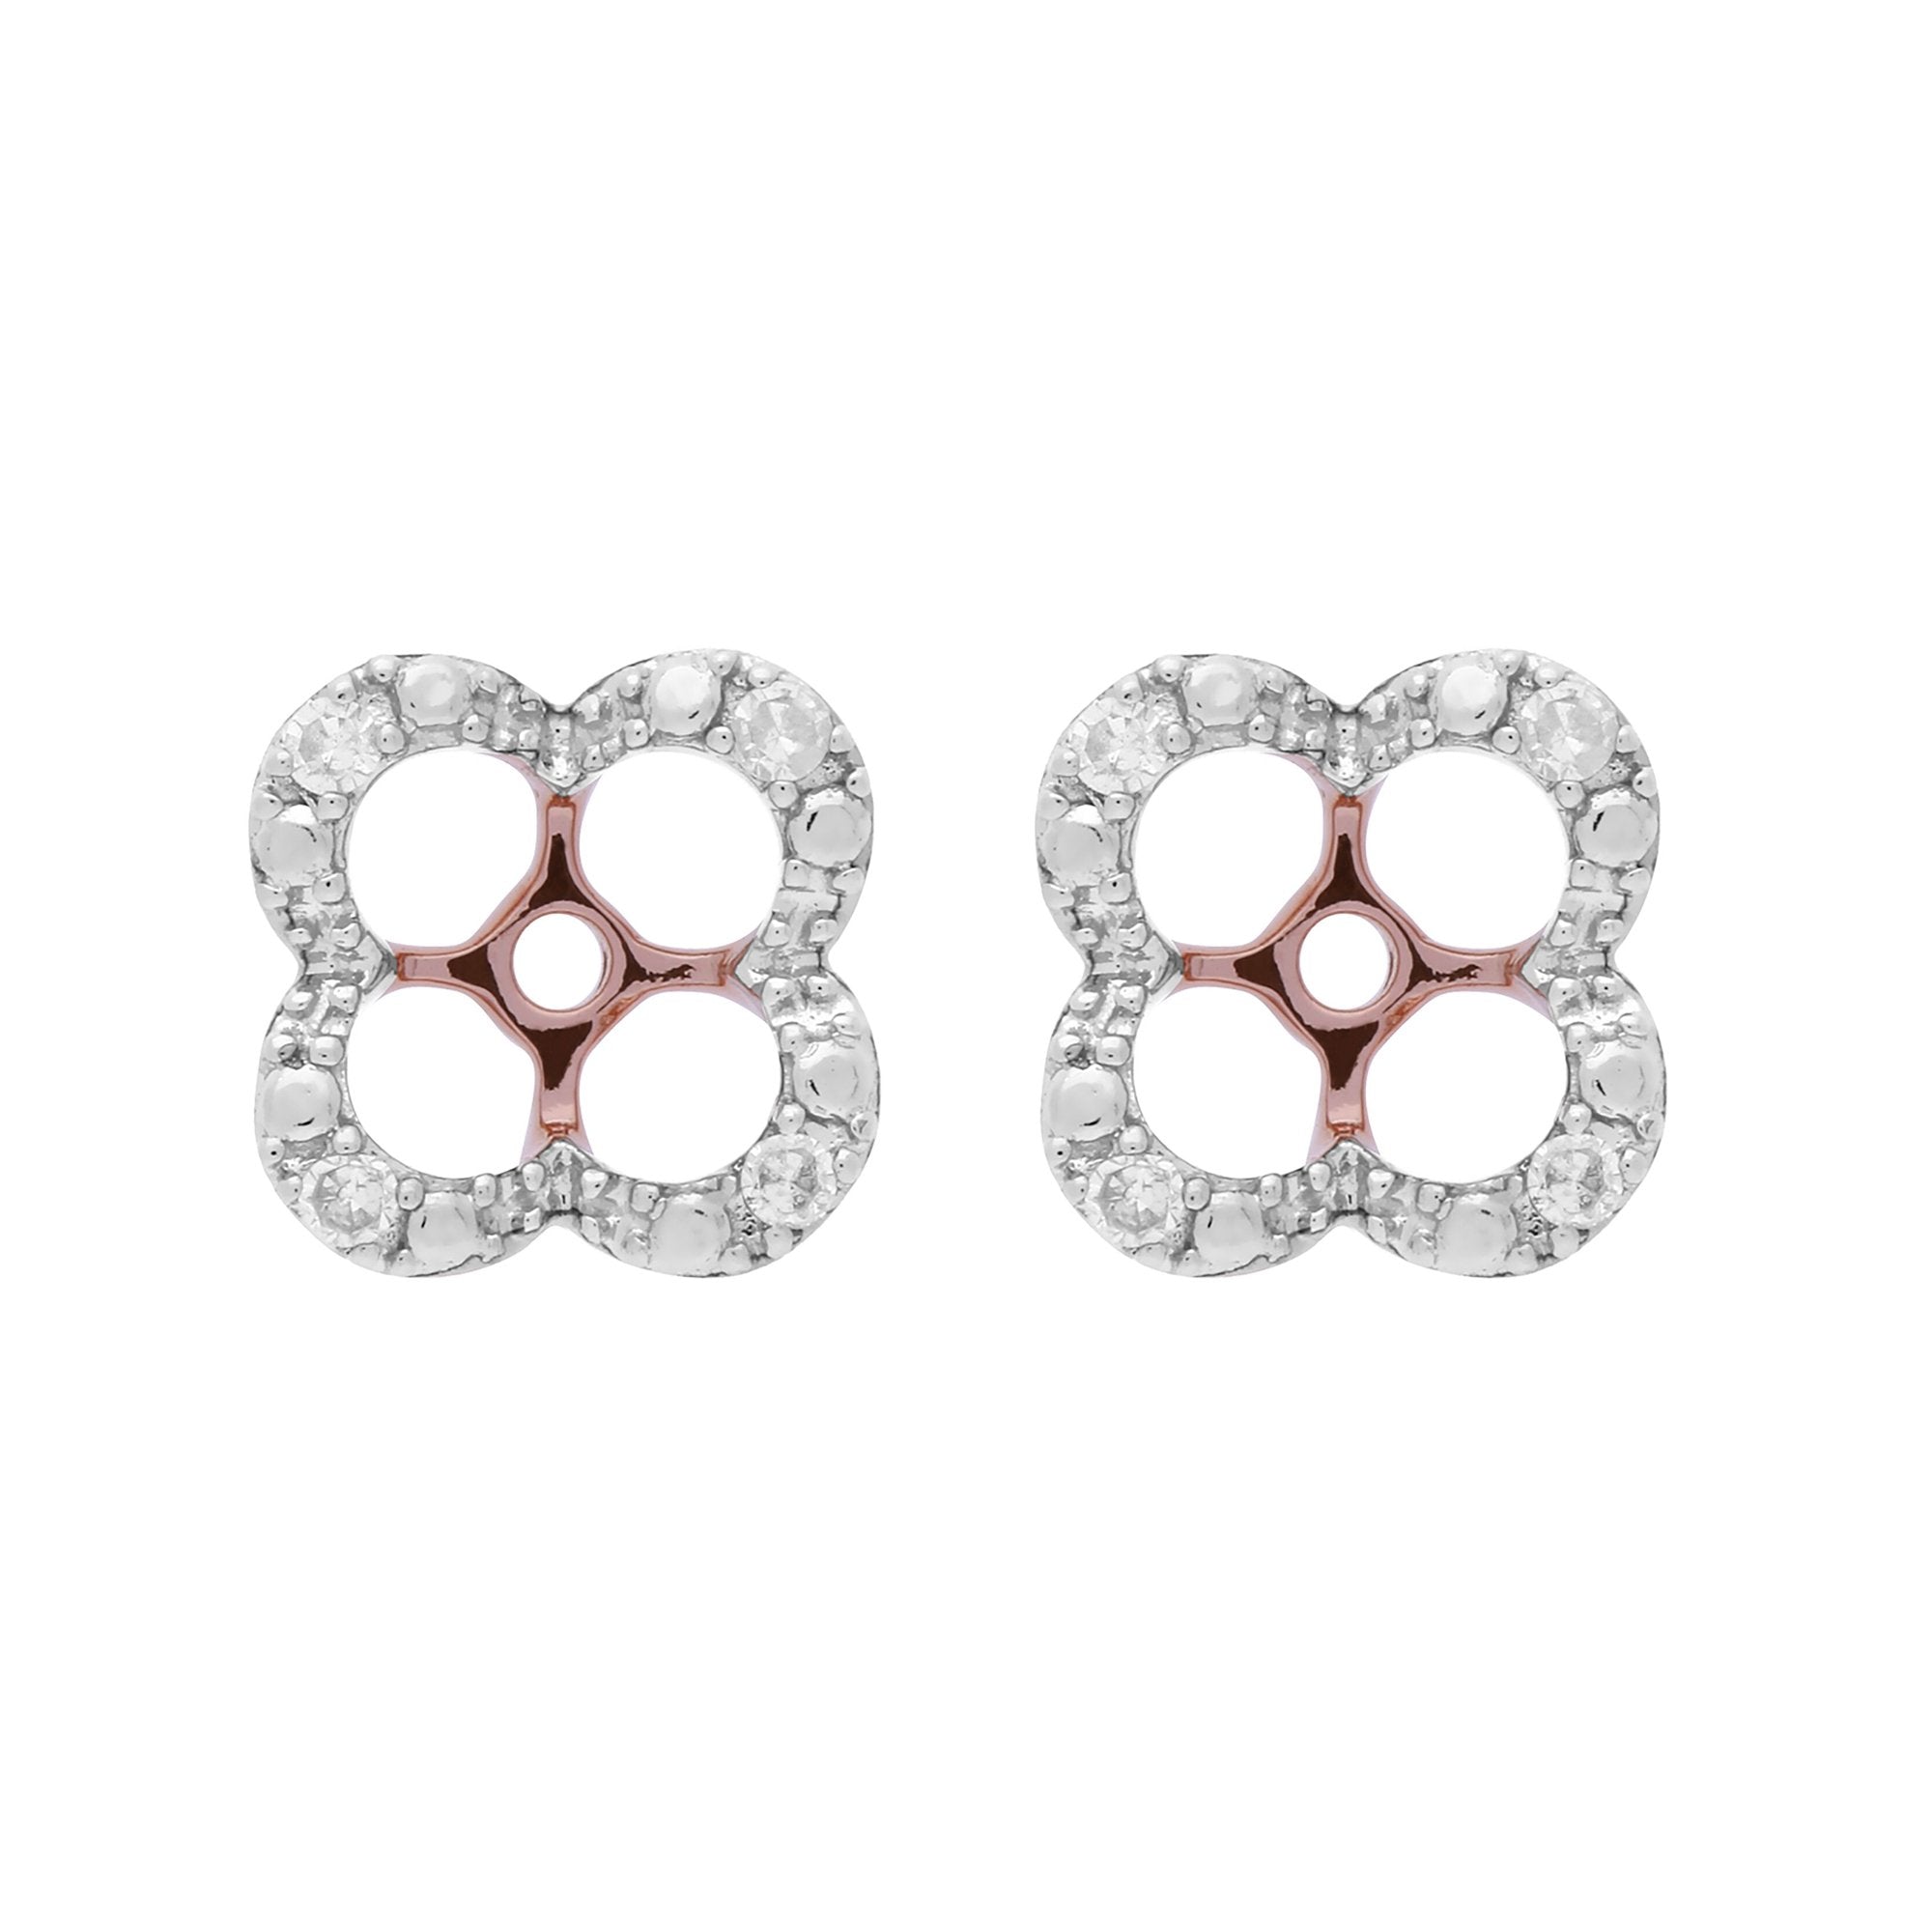 Floral Round Diamond Clover Shape Earrings Jacked in 9ct Rose Gold